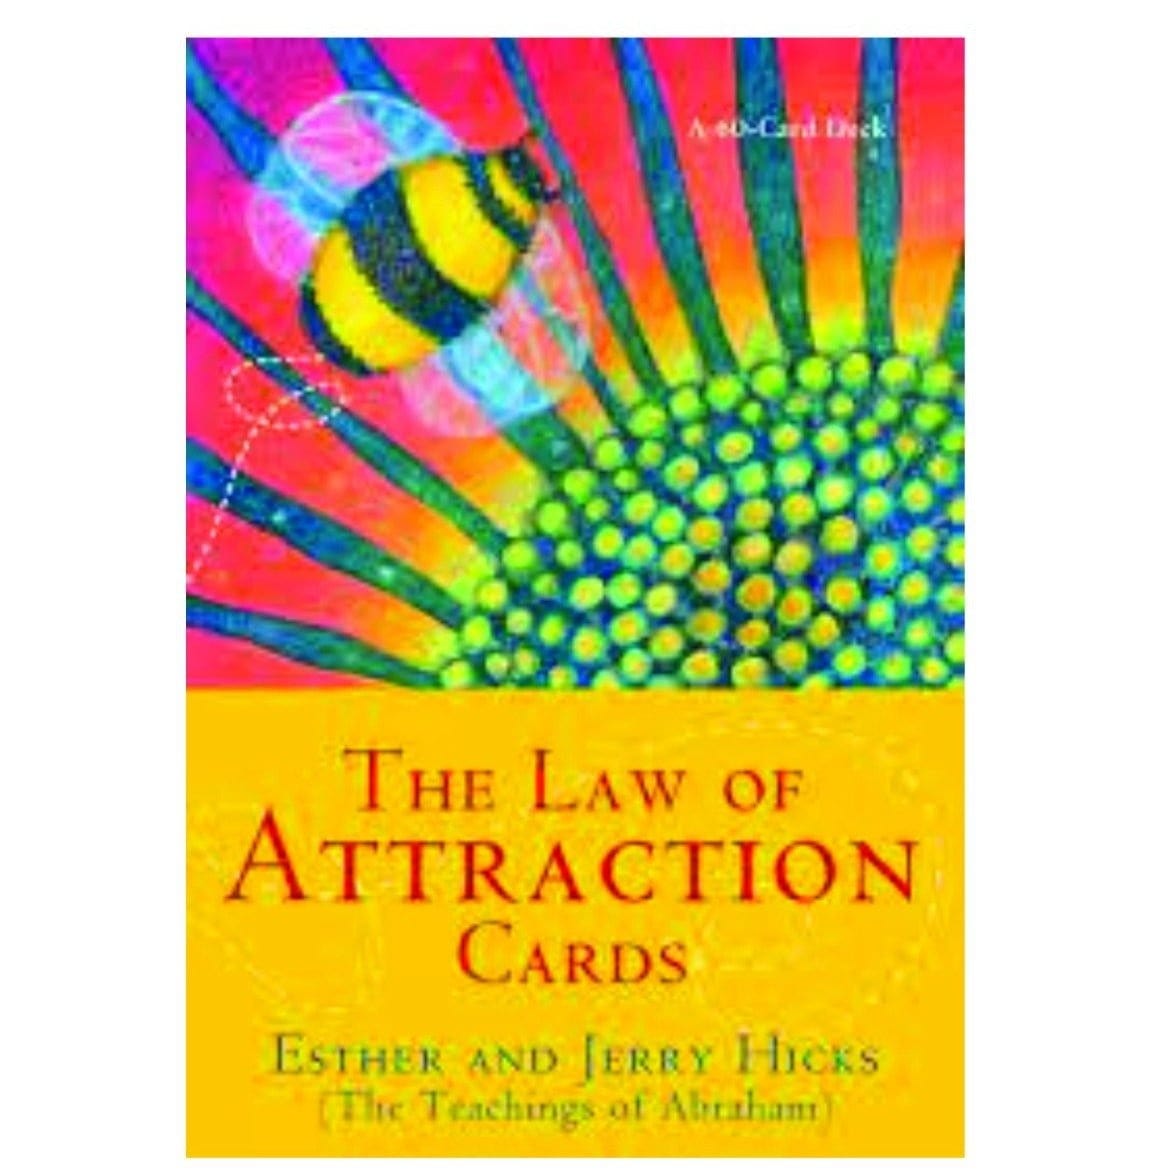 The Law of Attraction Card Deck